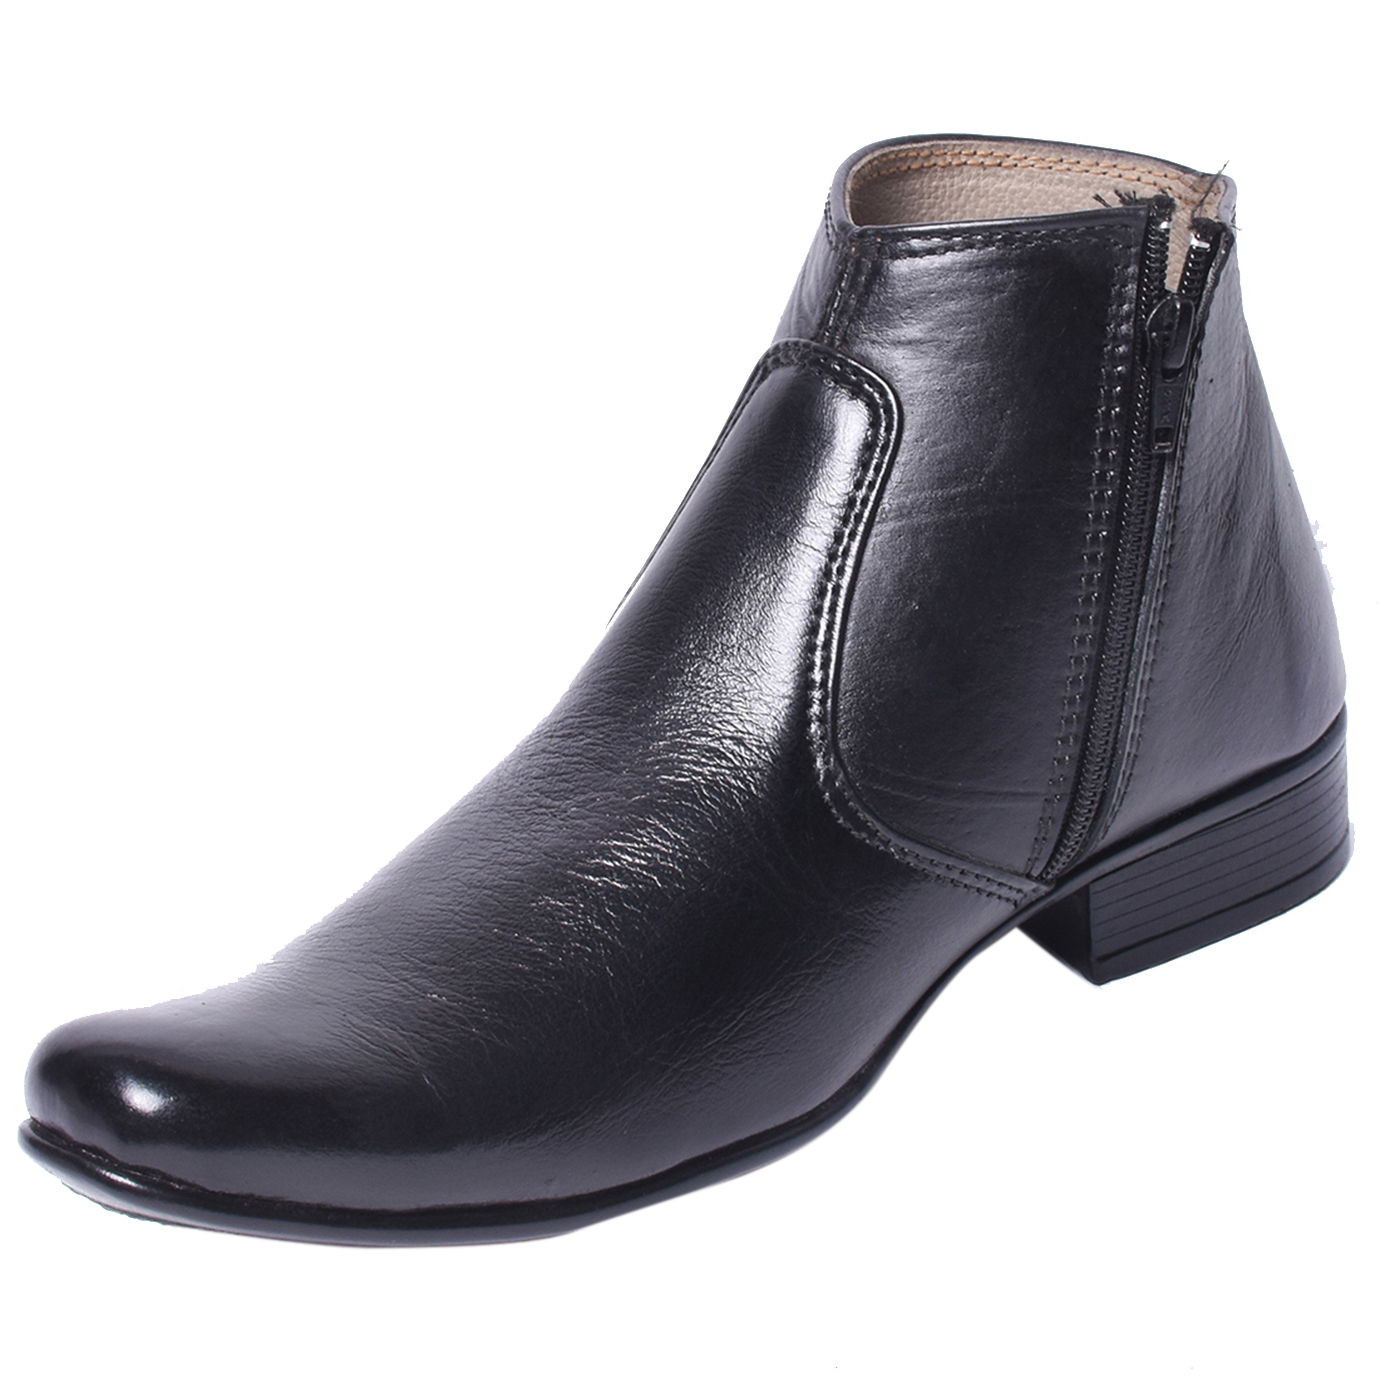 Buy Man's Black Formal Pure Leather Slip On Shoes Online @ ₹1994 from ...